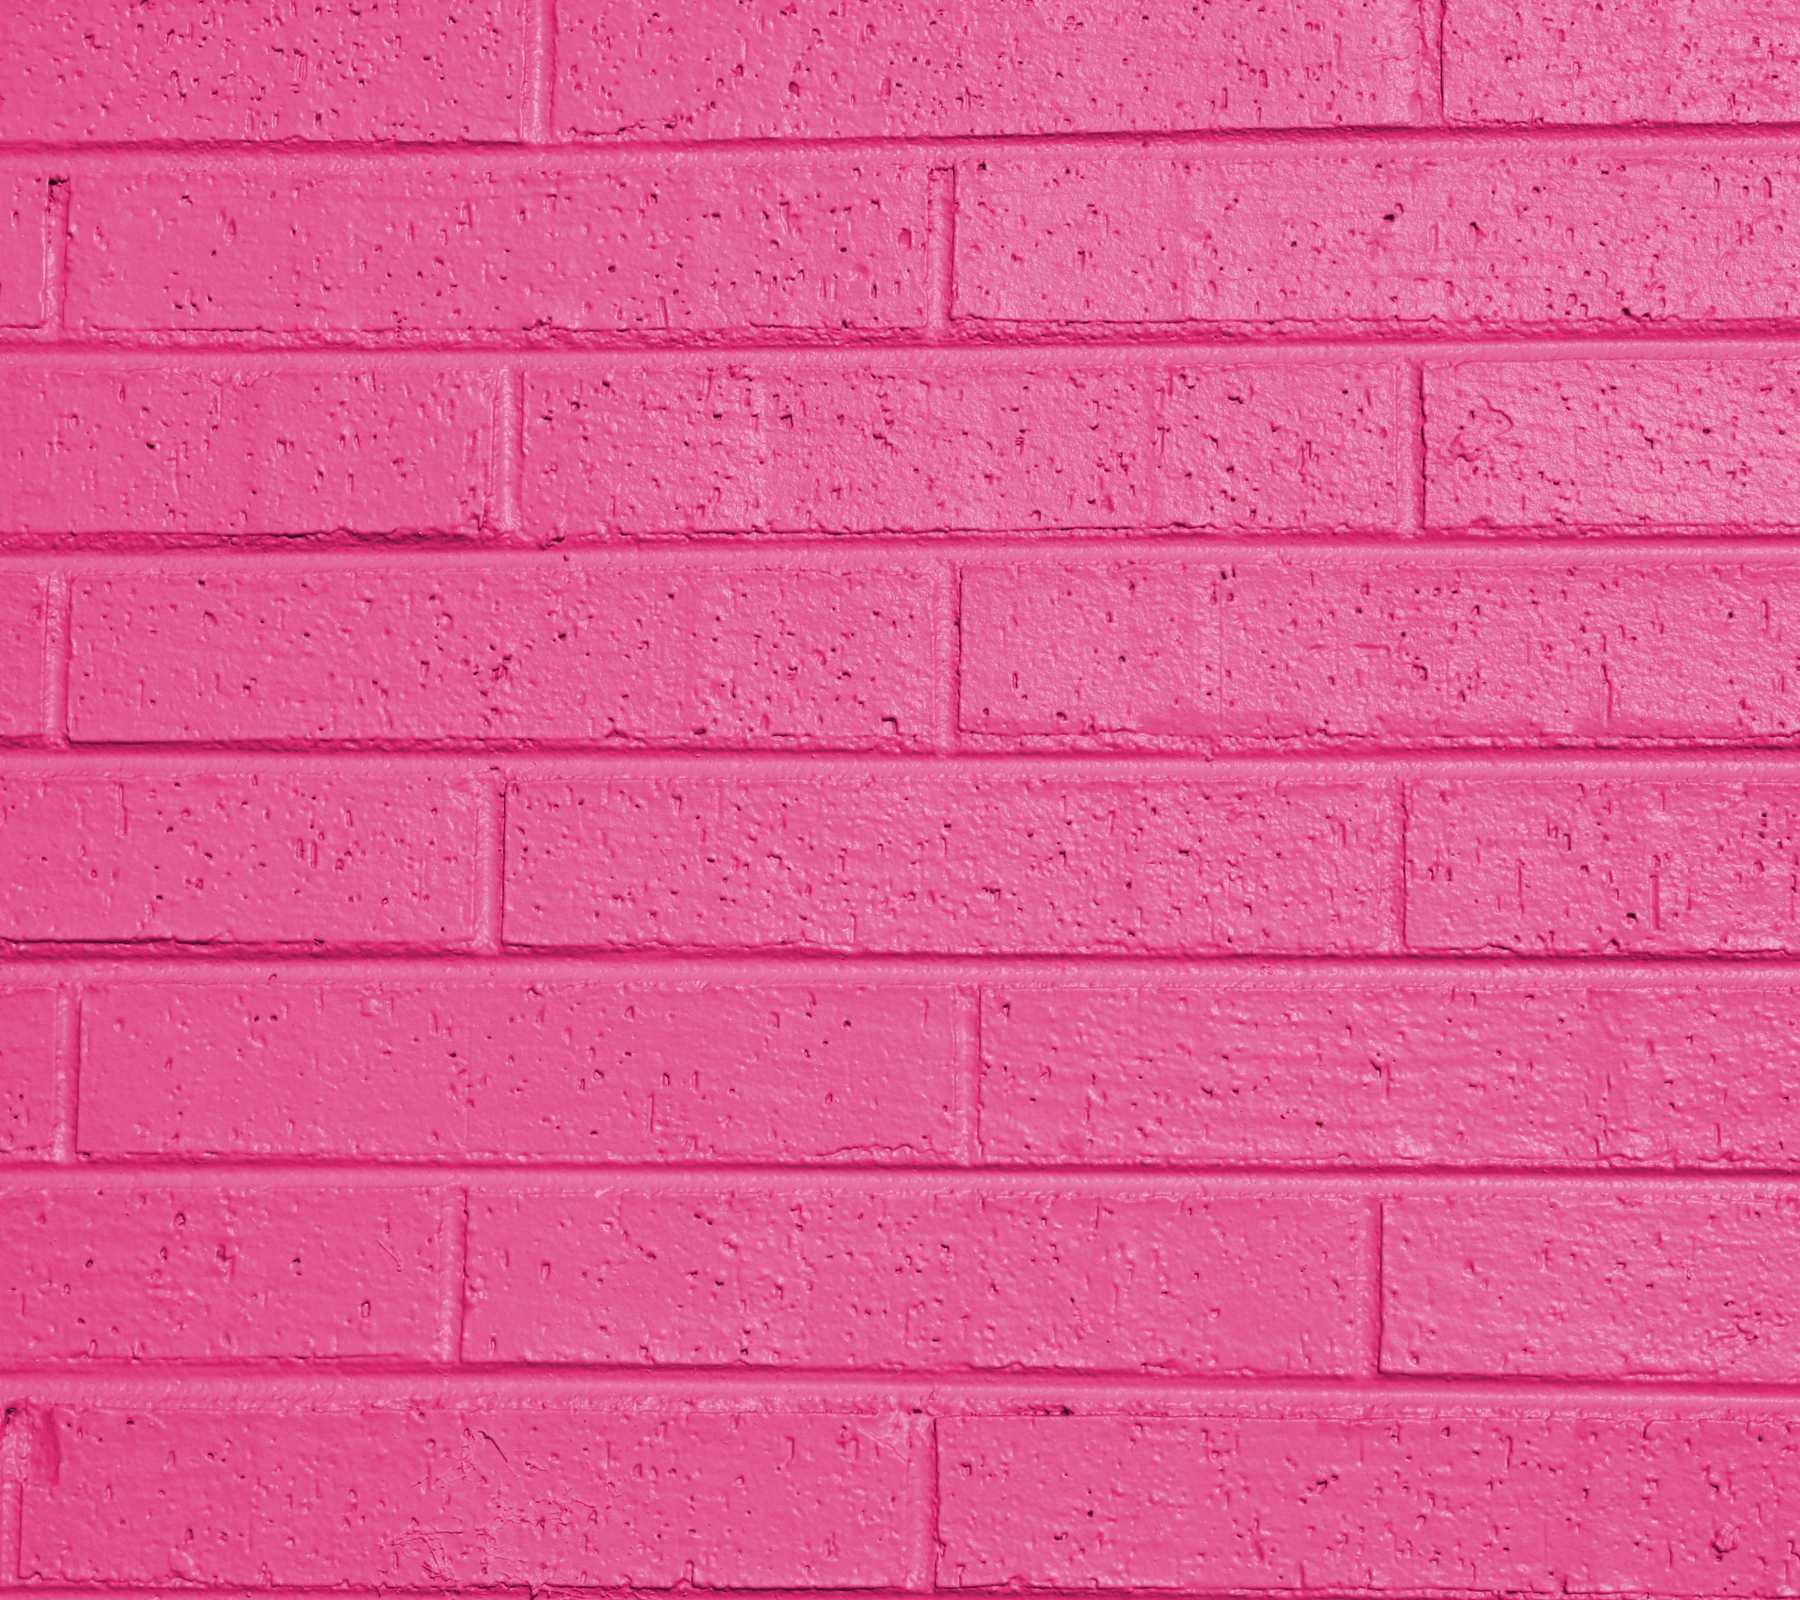 Hot Pink Painted Brick Wall Background Image Wallpaper Or Texture